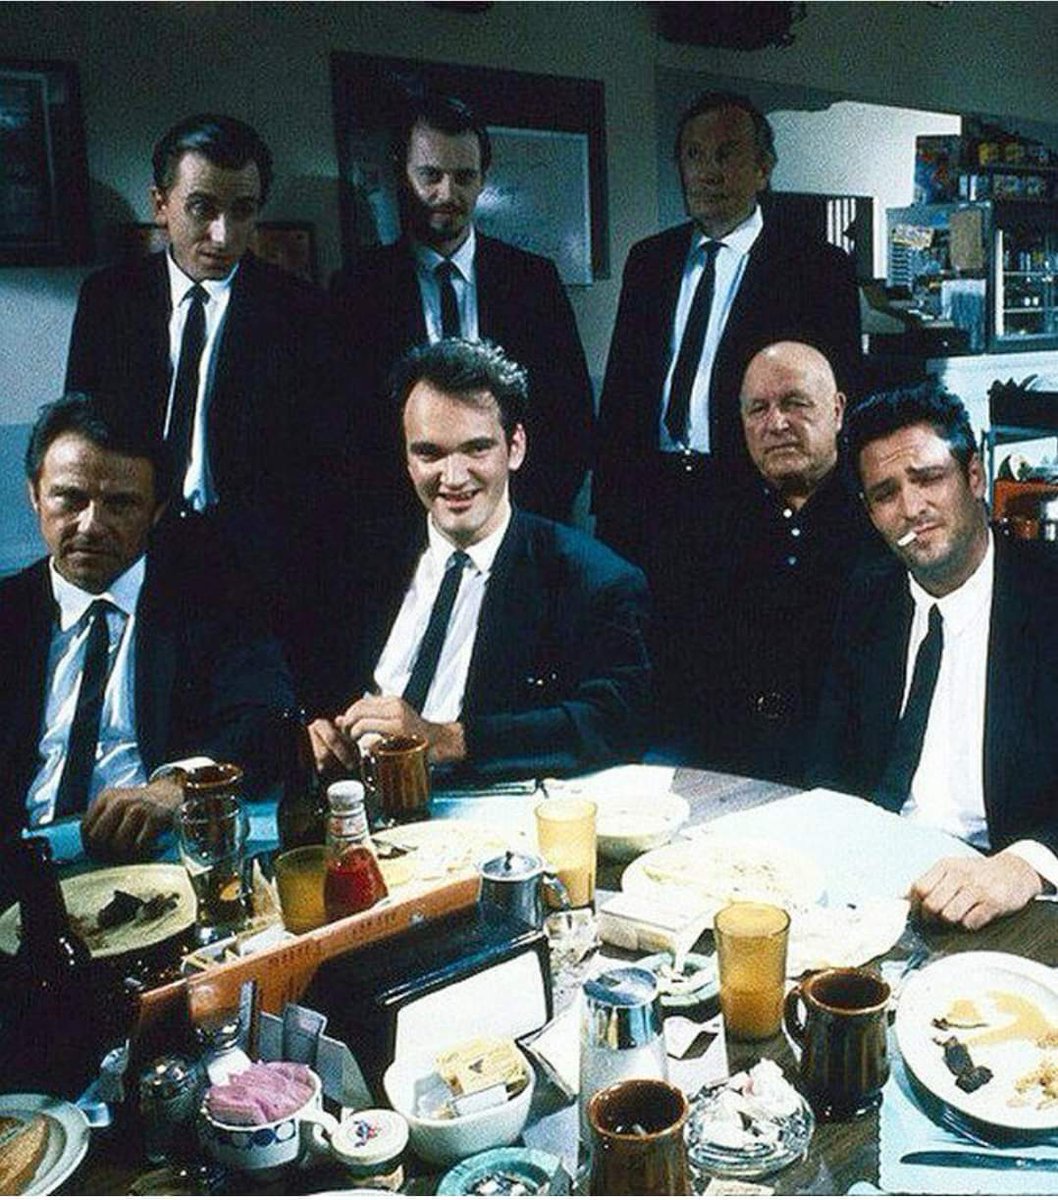 In #ReservoirDogs, the characters never actually carry out the planned diamond heist on screen, focusing instead on the aftermath and the relationships between the criminals. This unique storytelling approach not only saved on budget but also set Quentin Tarantino apart as a…